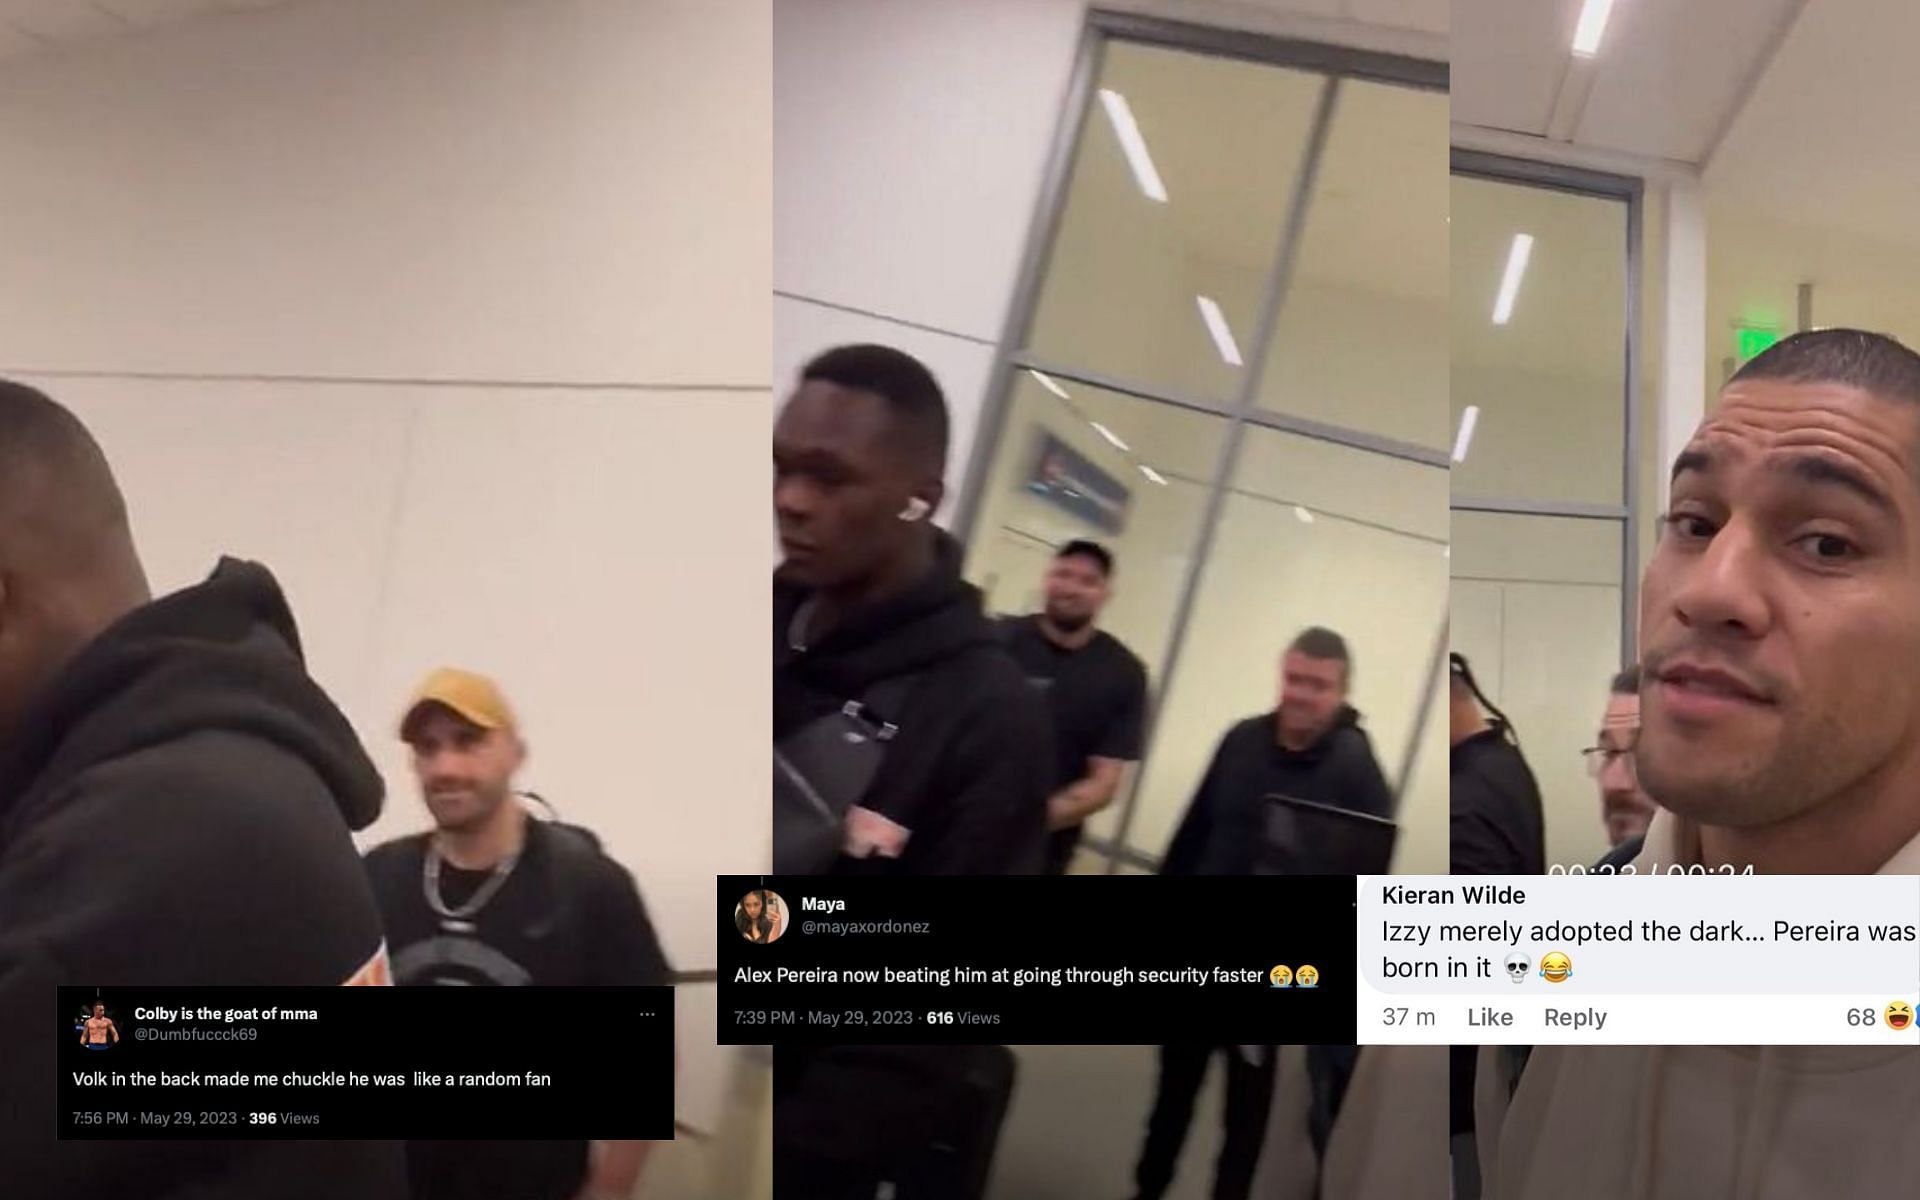 Israel Adesanya and Alex Pereira run into each other at an airport (Image courtesy - @Stylebender, @AlexPereiraUFC on TwitteR)